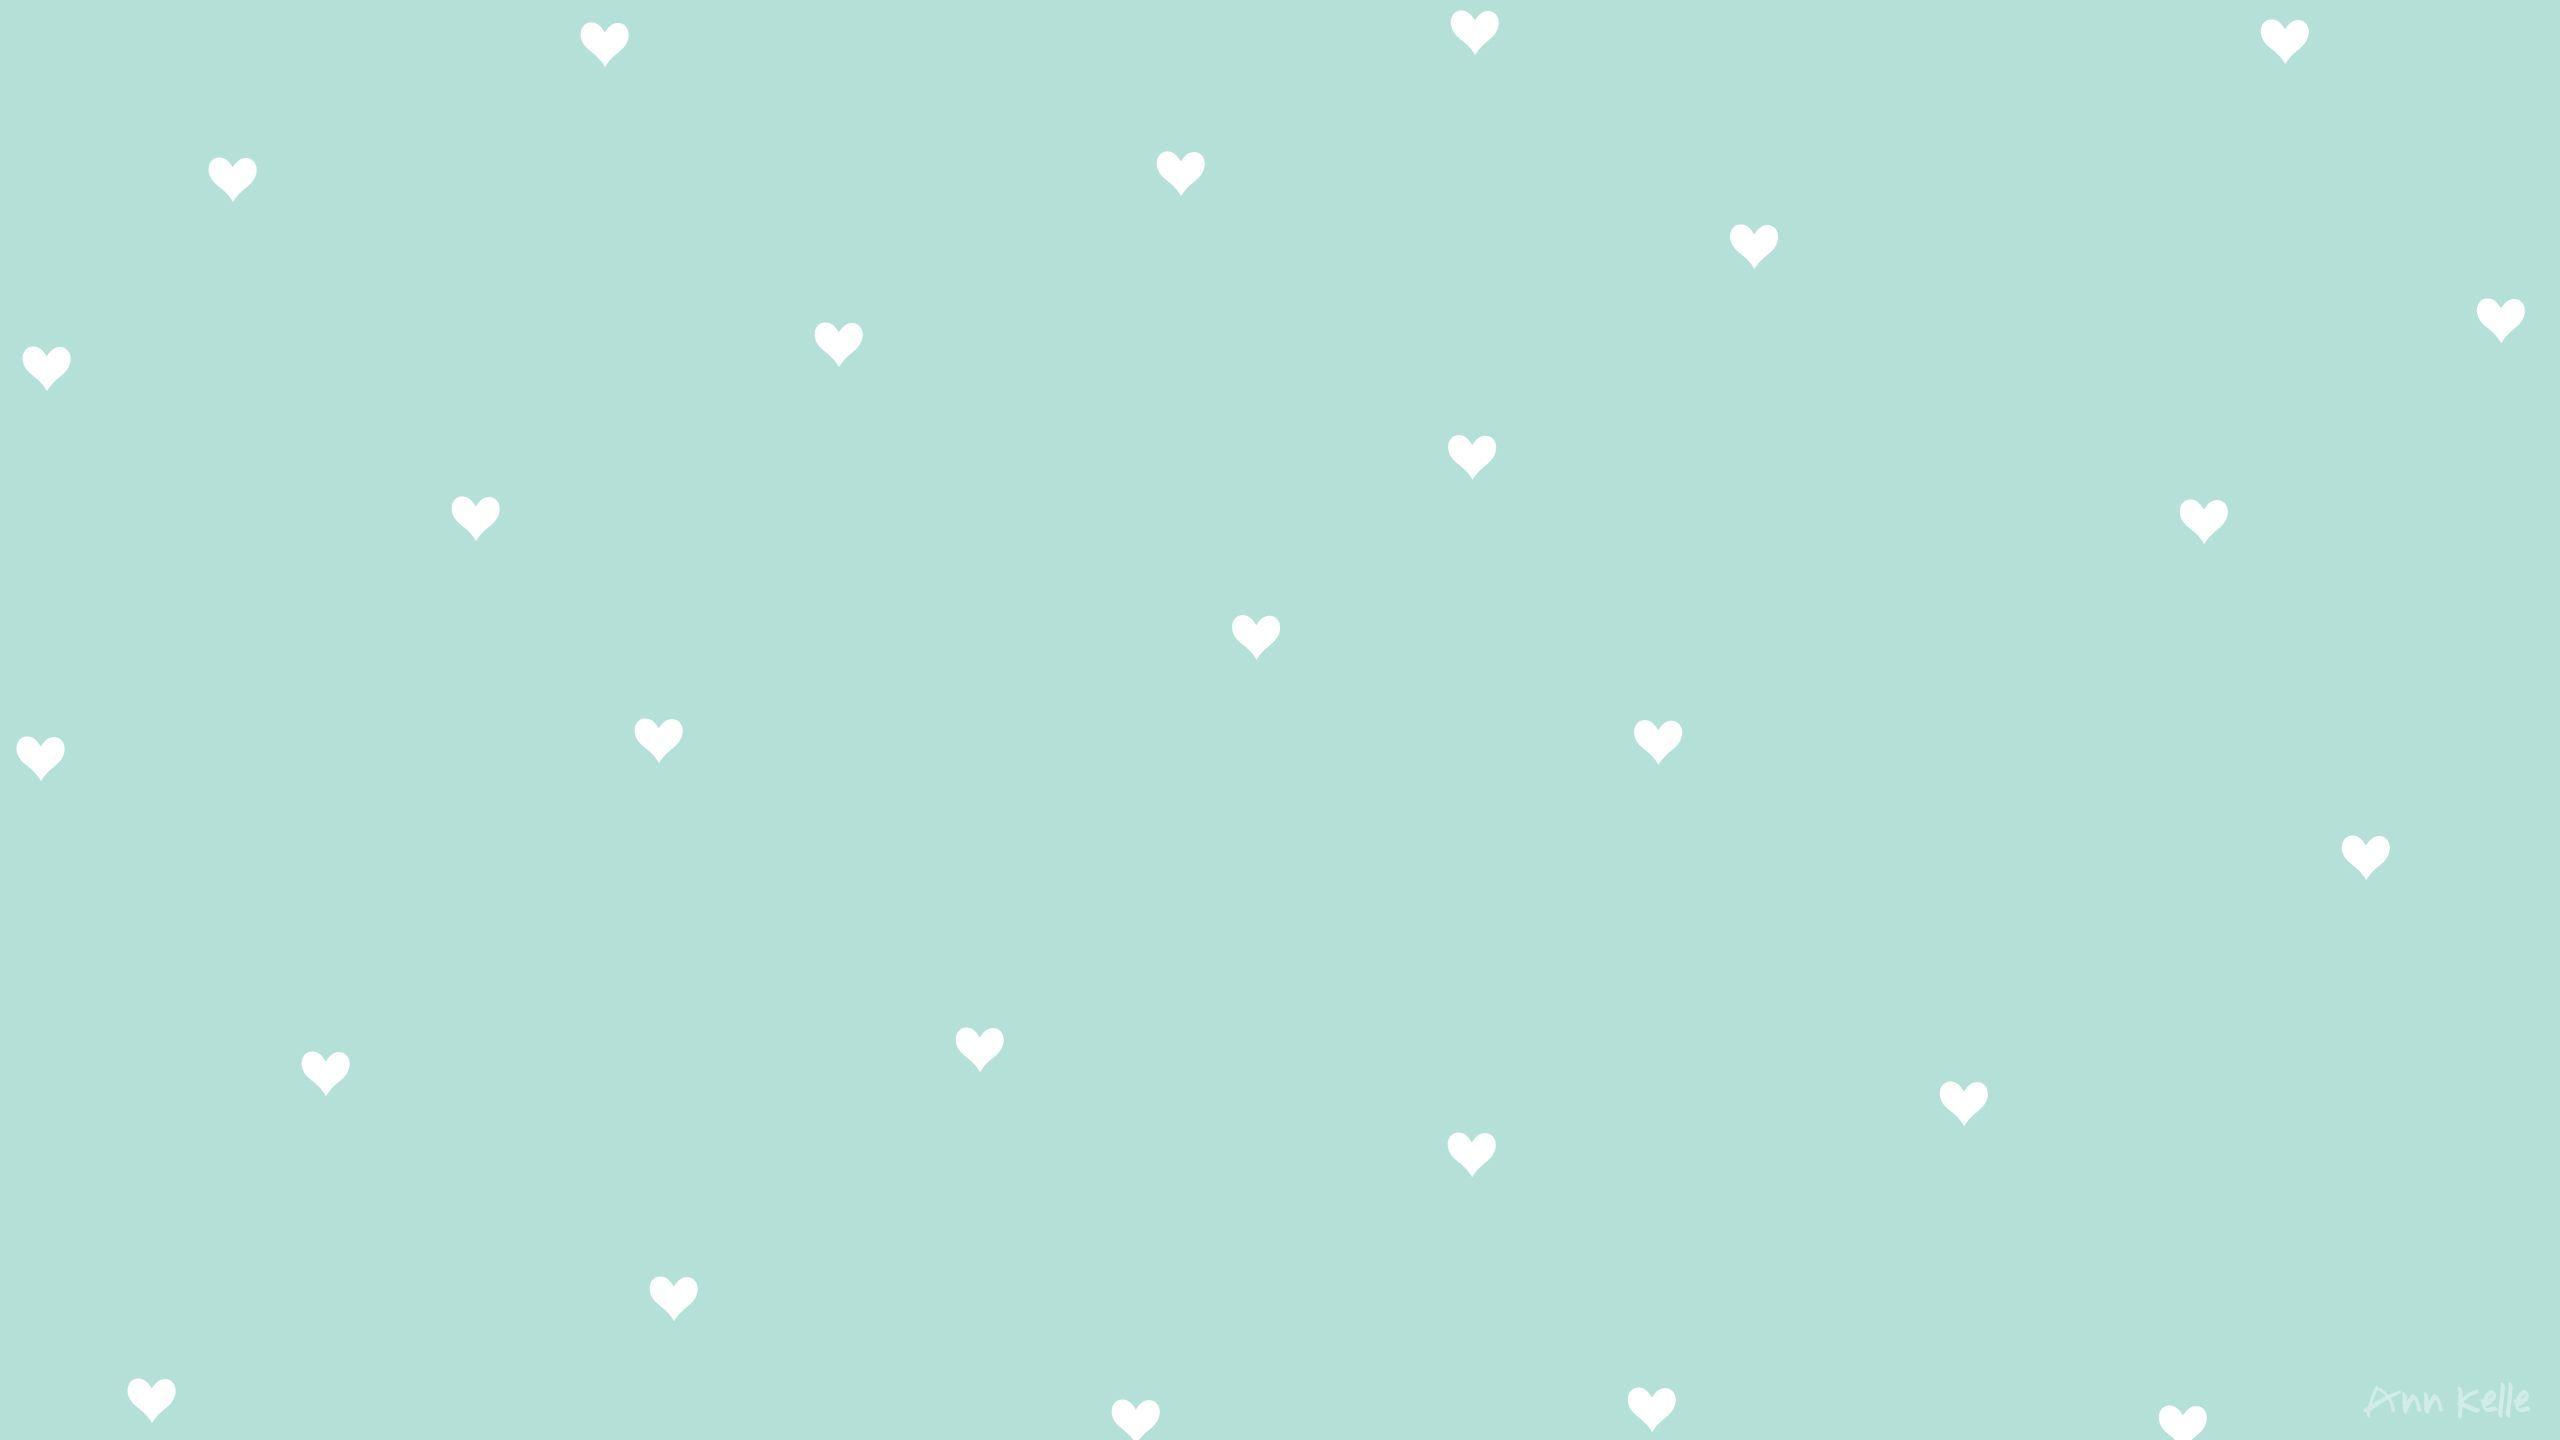 Mint Aesthetic Laptop Wallpapers Top Free Mint Aesthetic Laptop Backgrounds Wallpaperaccess Daily additions of new, awesome, hd aesthetic wallpapers for desktop and phones. mint aesthetic laptop wallpapers top